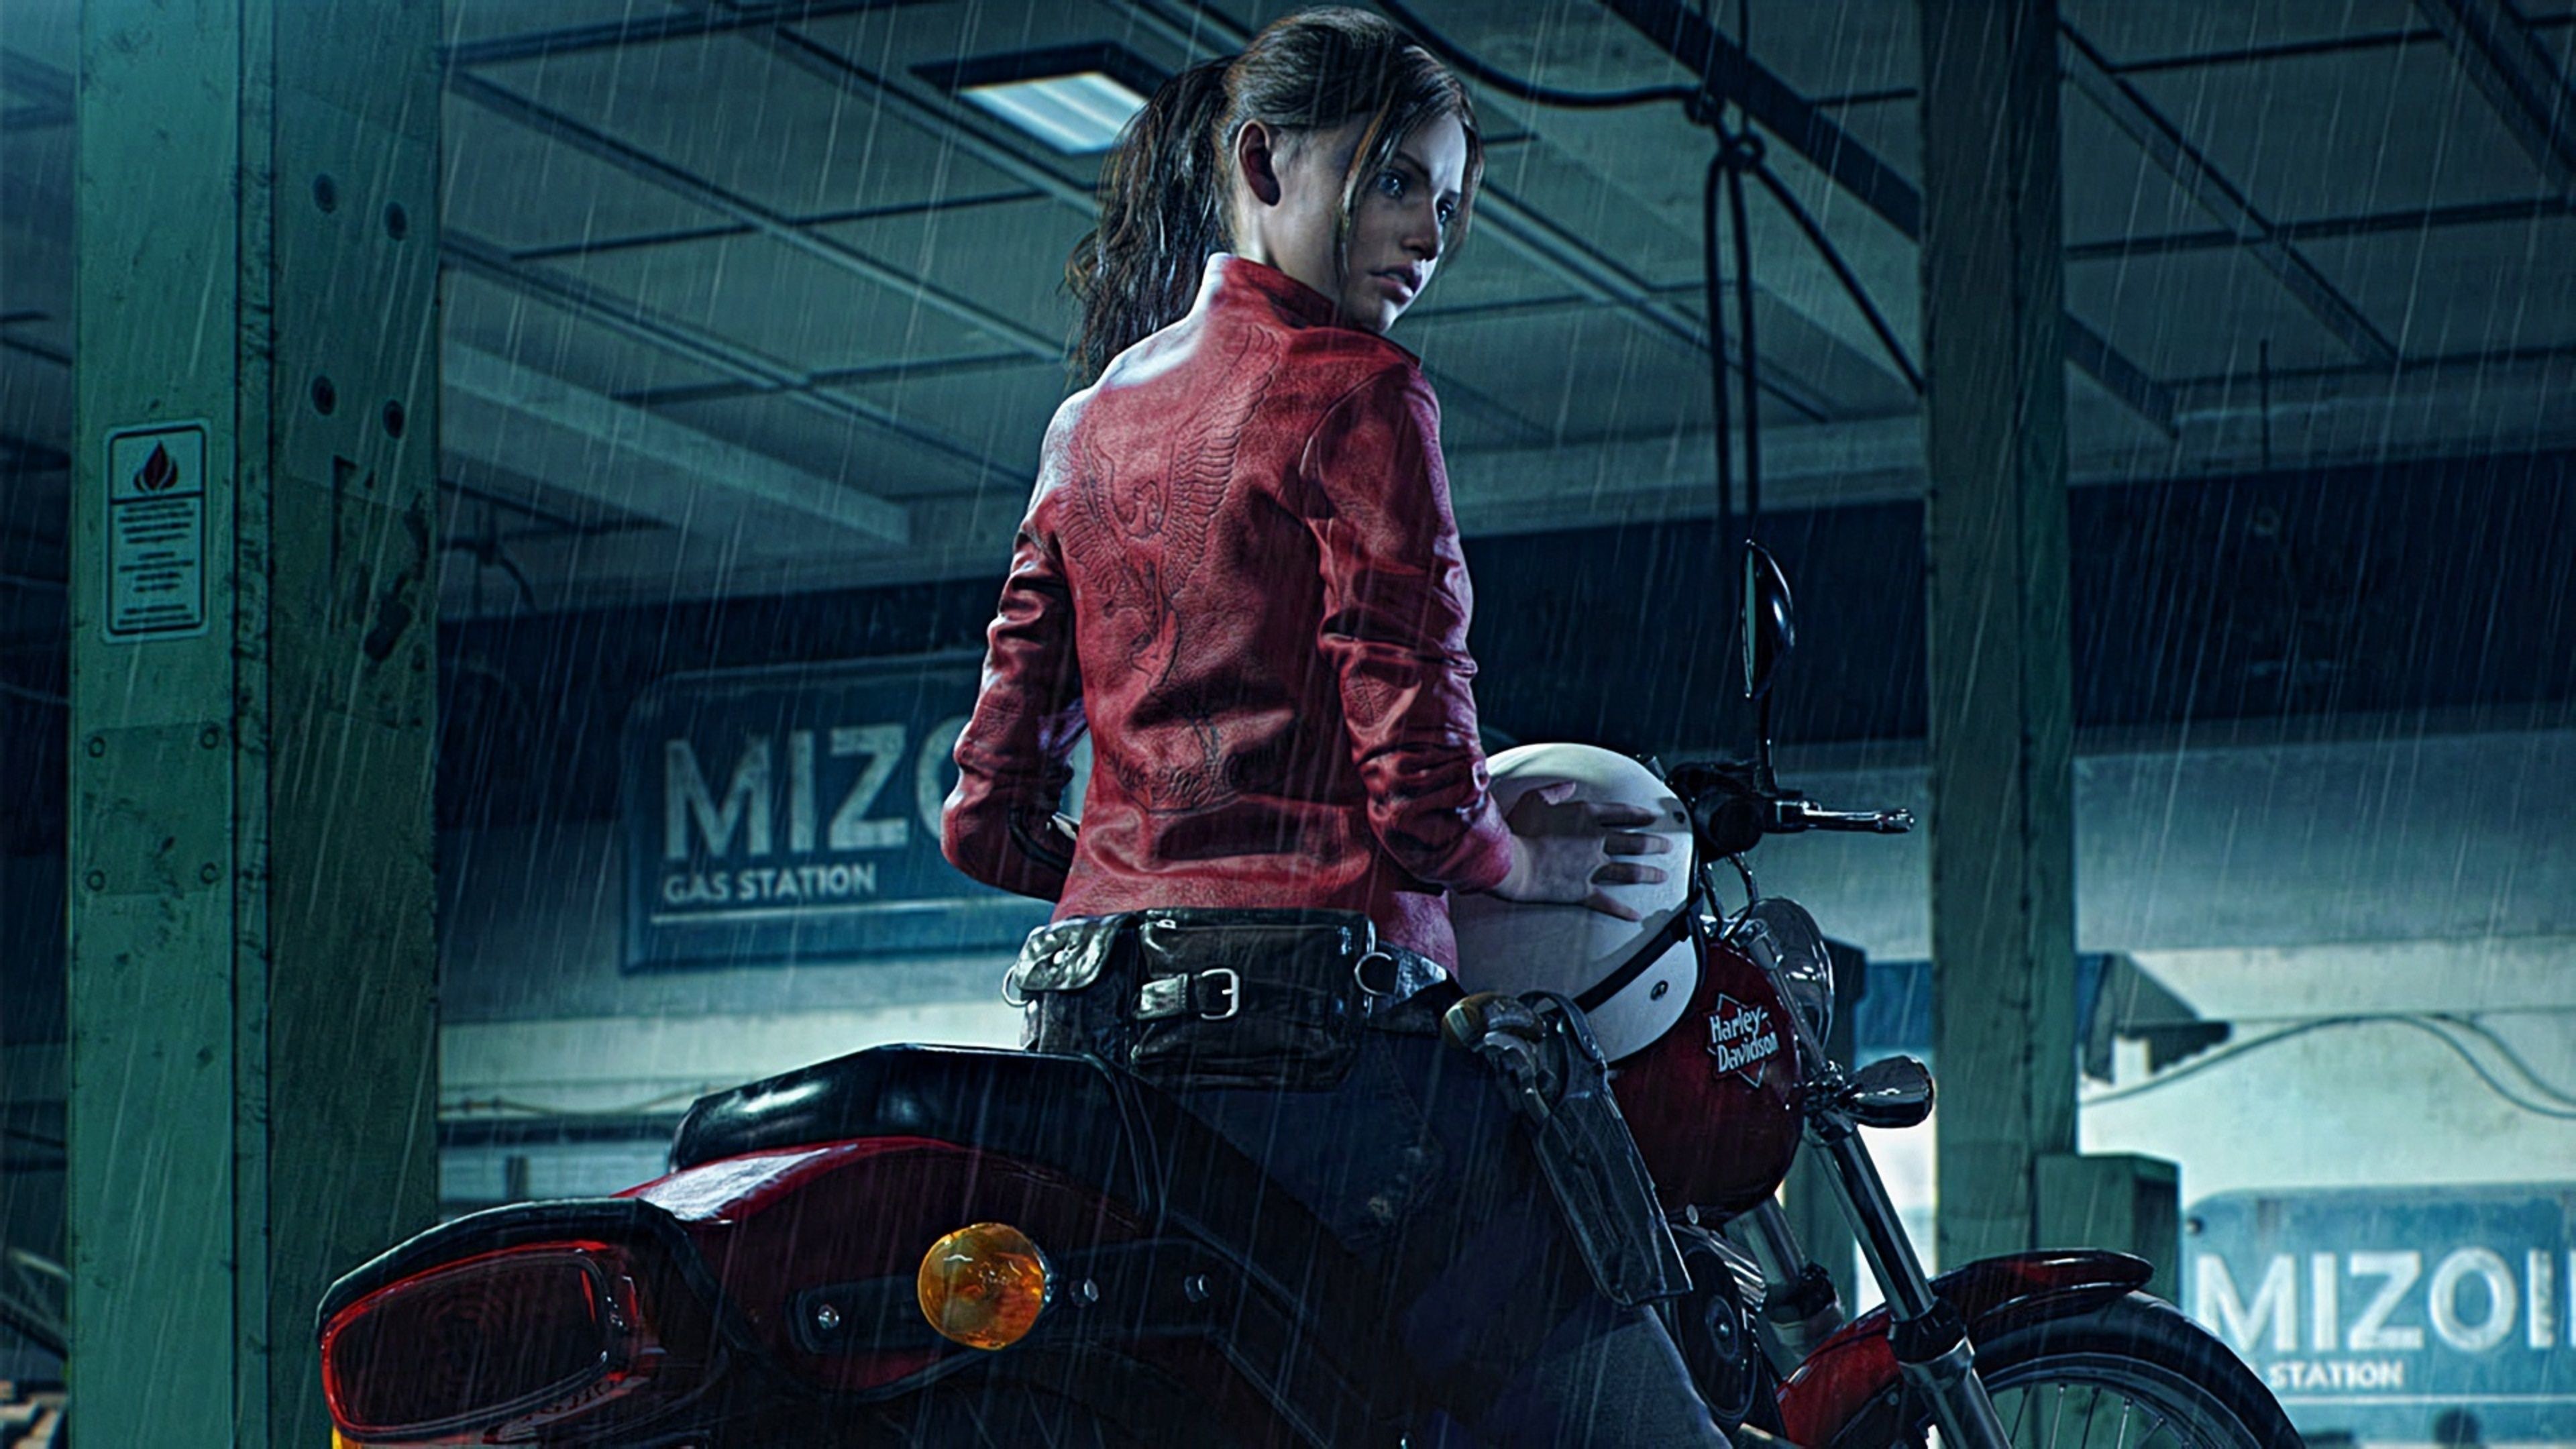 3840x2160 Resident Evil 2 2019 Claire Redfield Harley Davidson resident evil 2  wallpapers, hd-wallpapers, games wallpapers, claire redfield wallpapers, 4k- wallpapers, ...